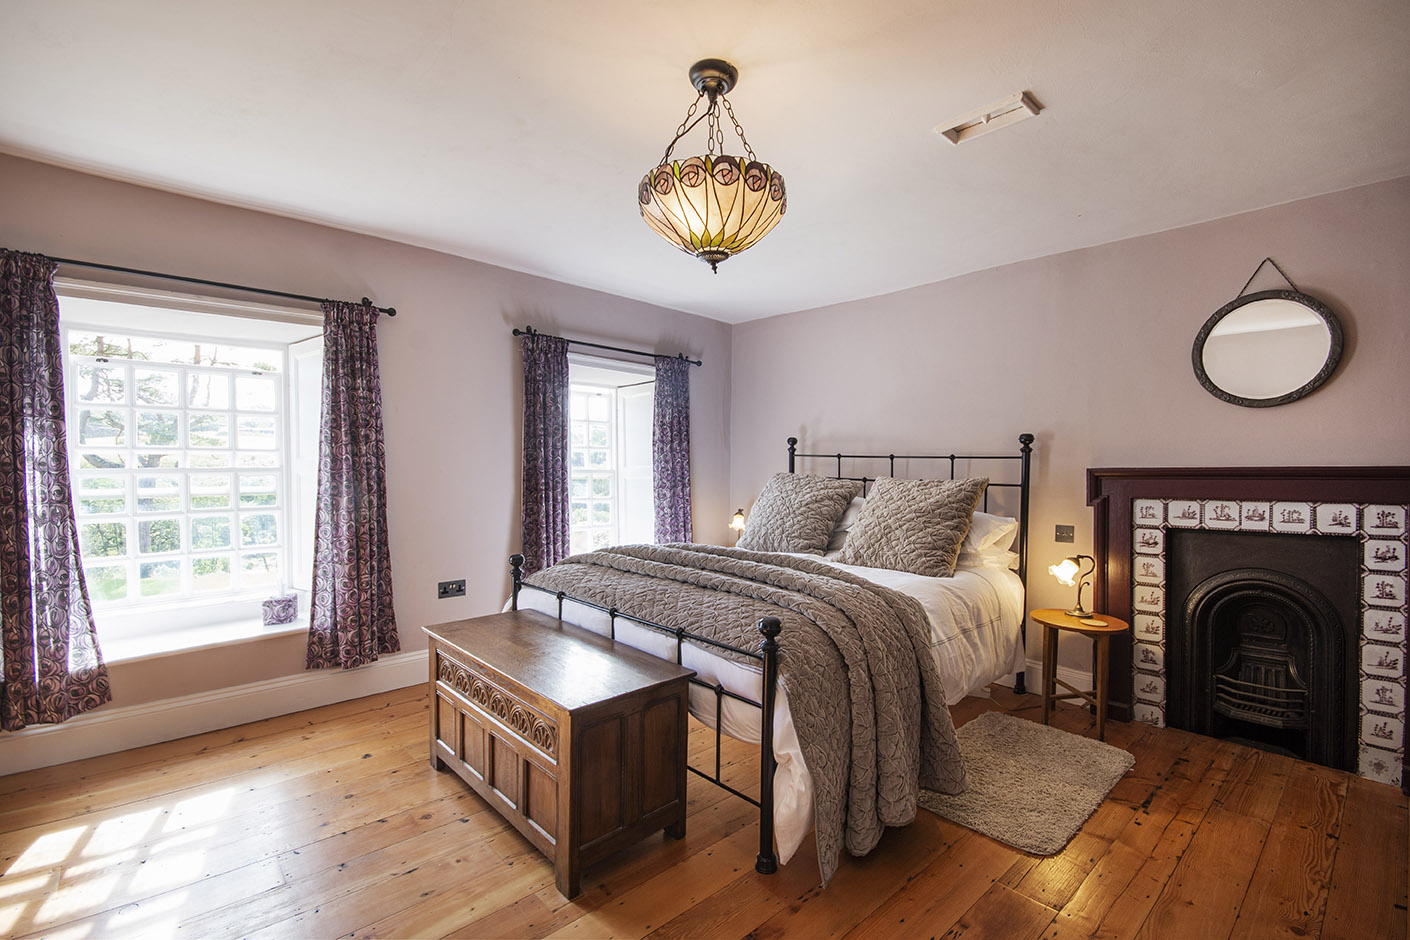 one of the bedrooms decorated in lilac and greys with old fireplace and cast iron bed frame